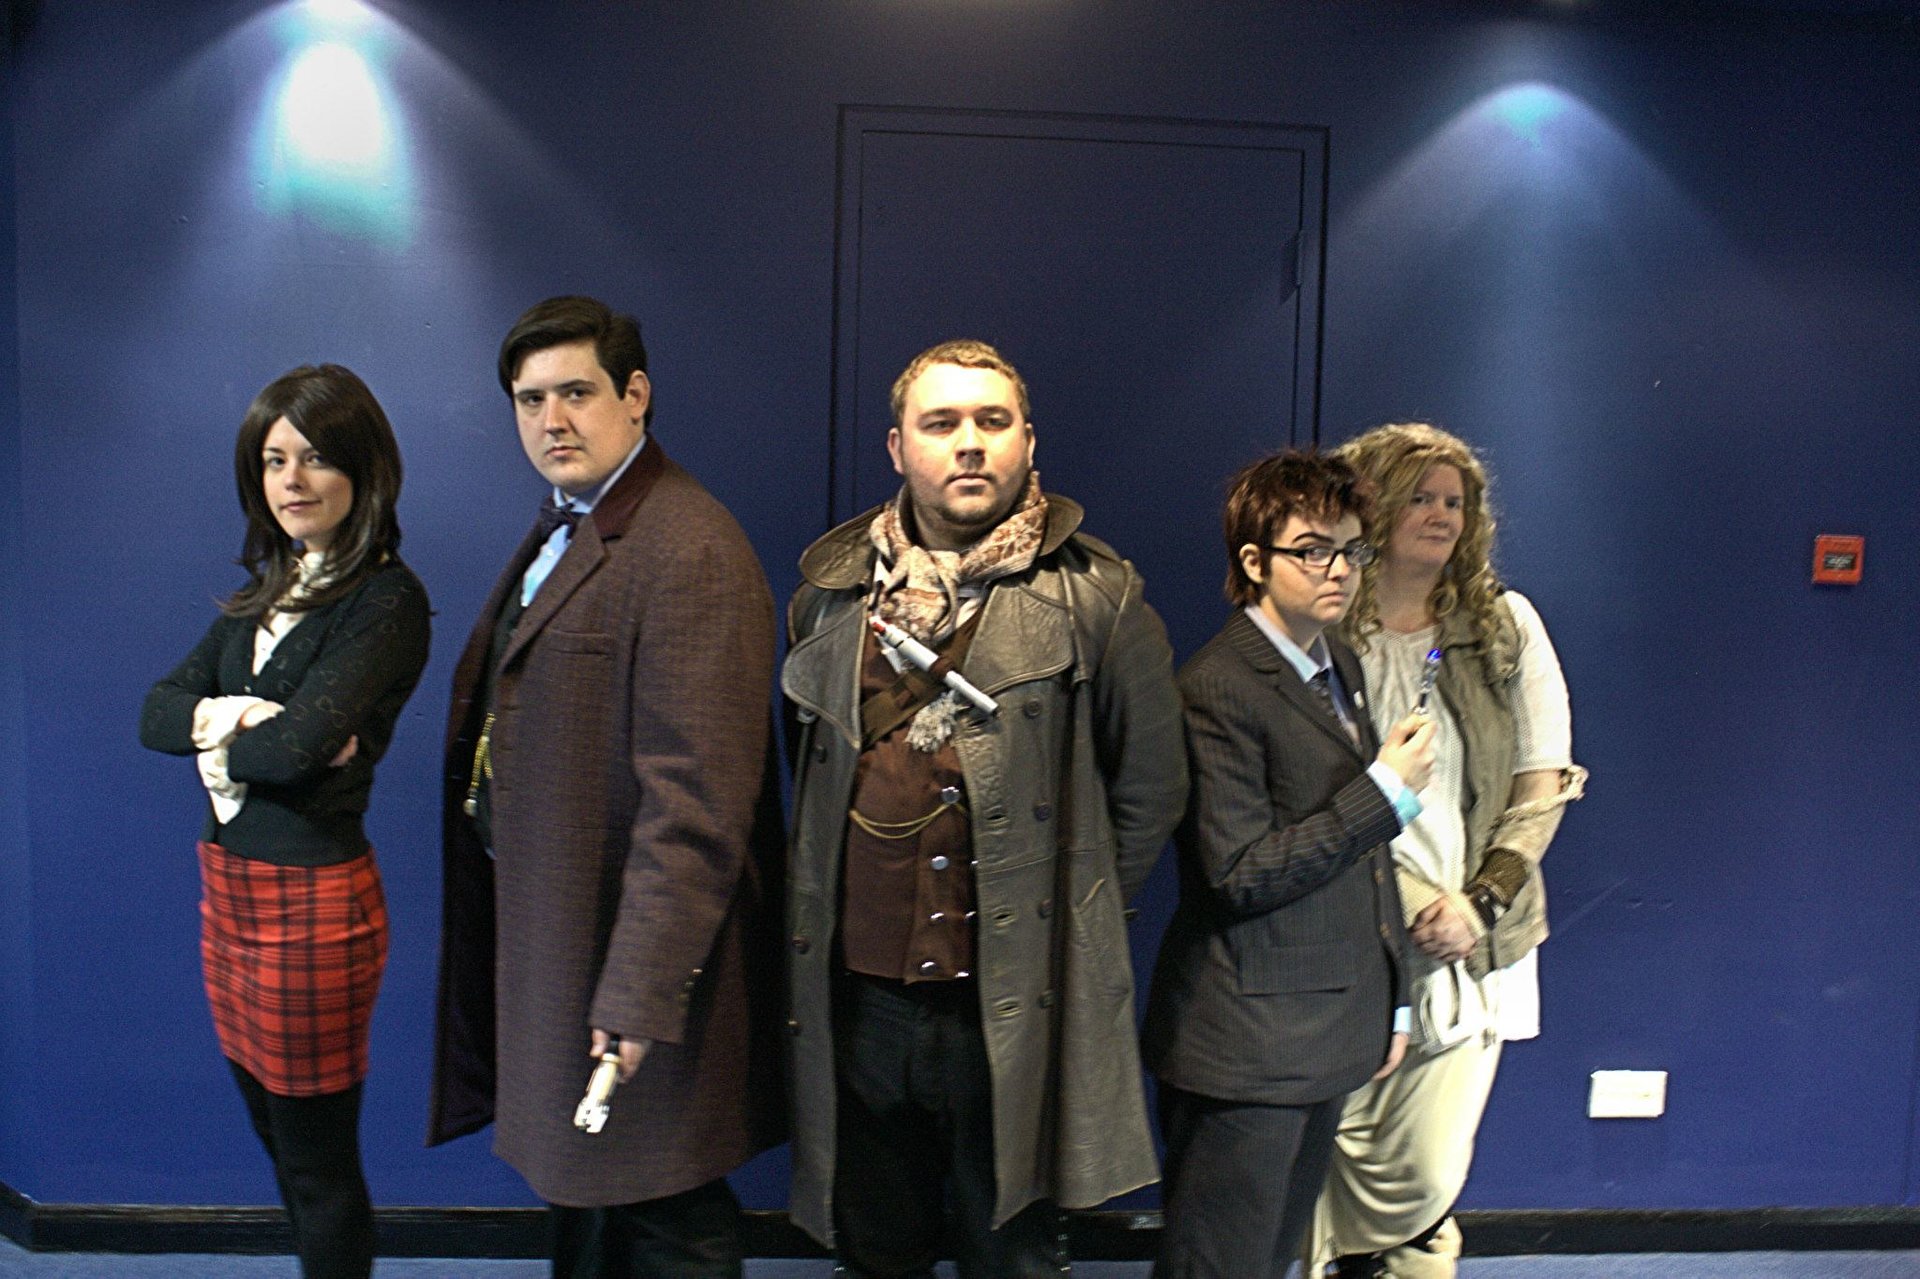 Cospix.net photo featuring Iron Whovian Cosplay